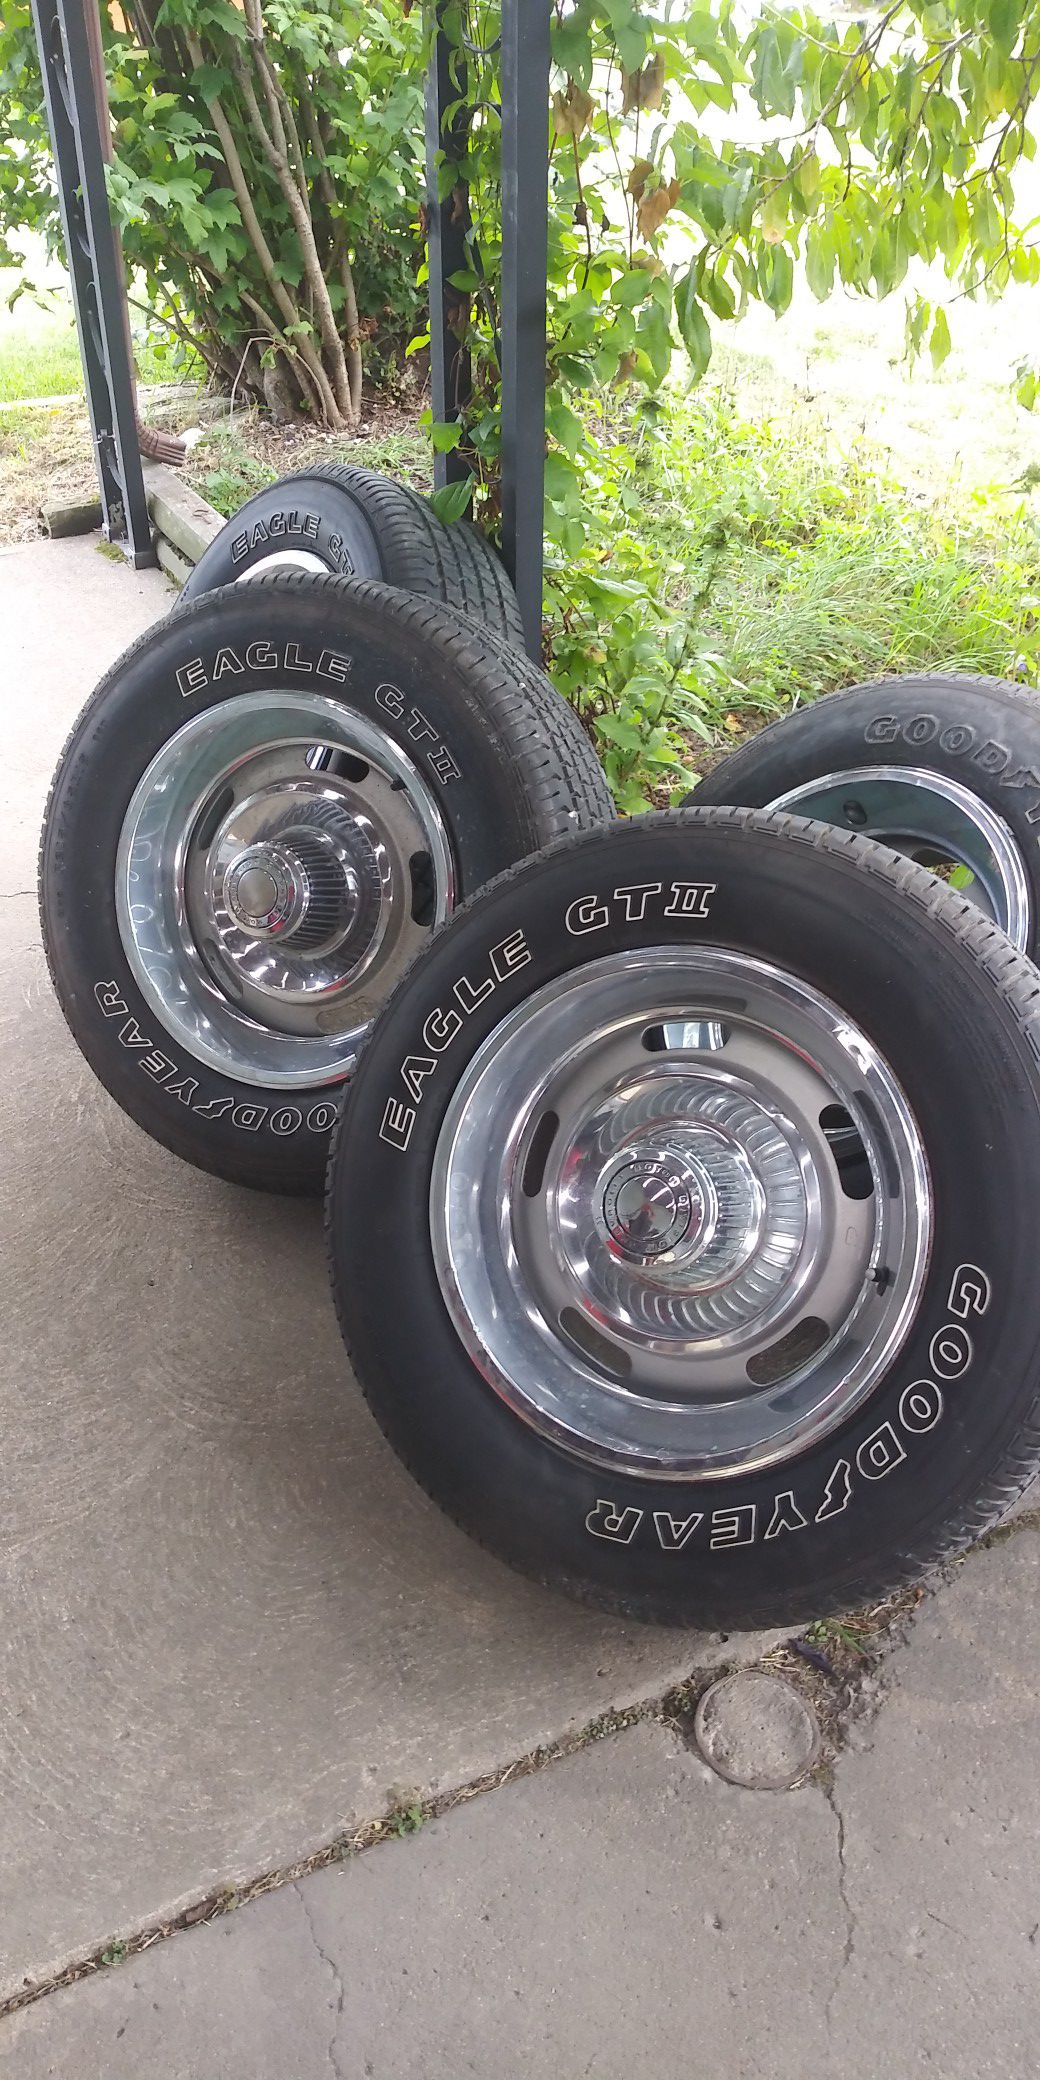 Chevy rally rims with good thread tires